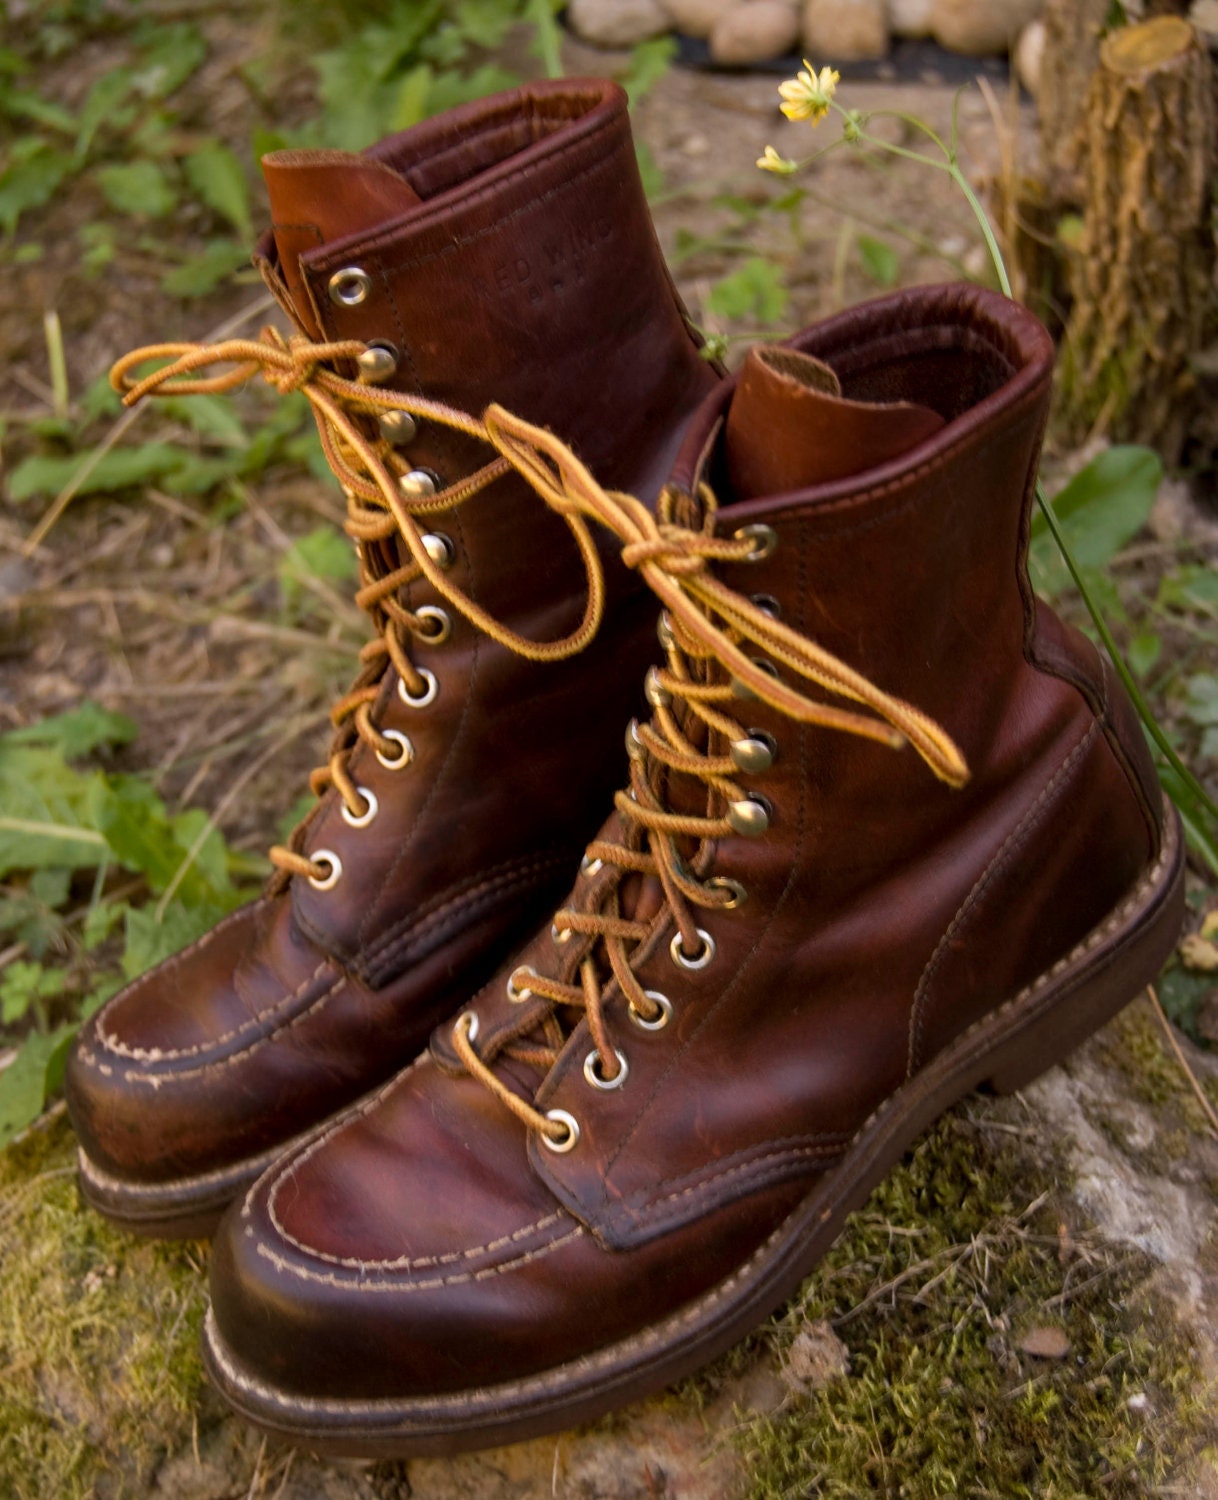 SALE Rare Vintage Red Wing Irish Setter by airstreamapparel